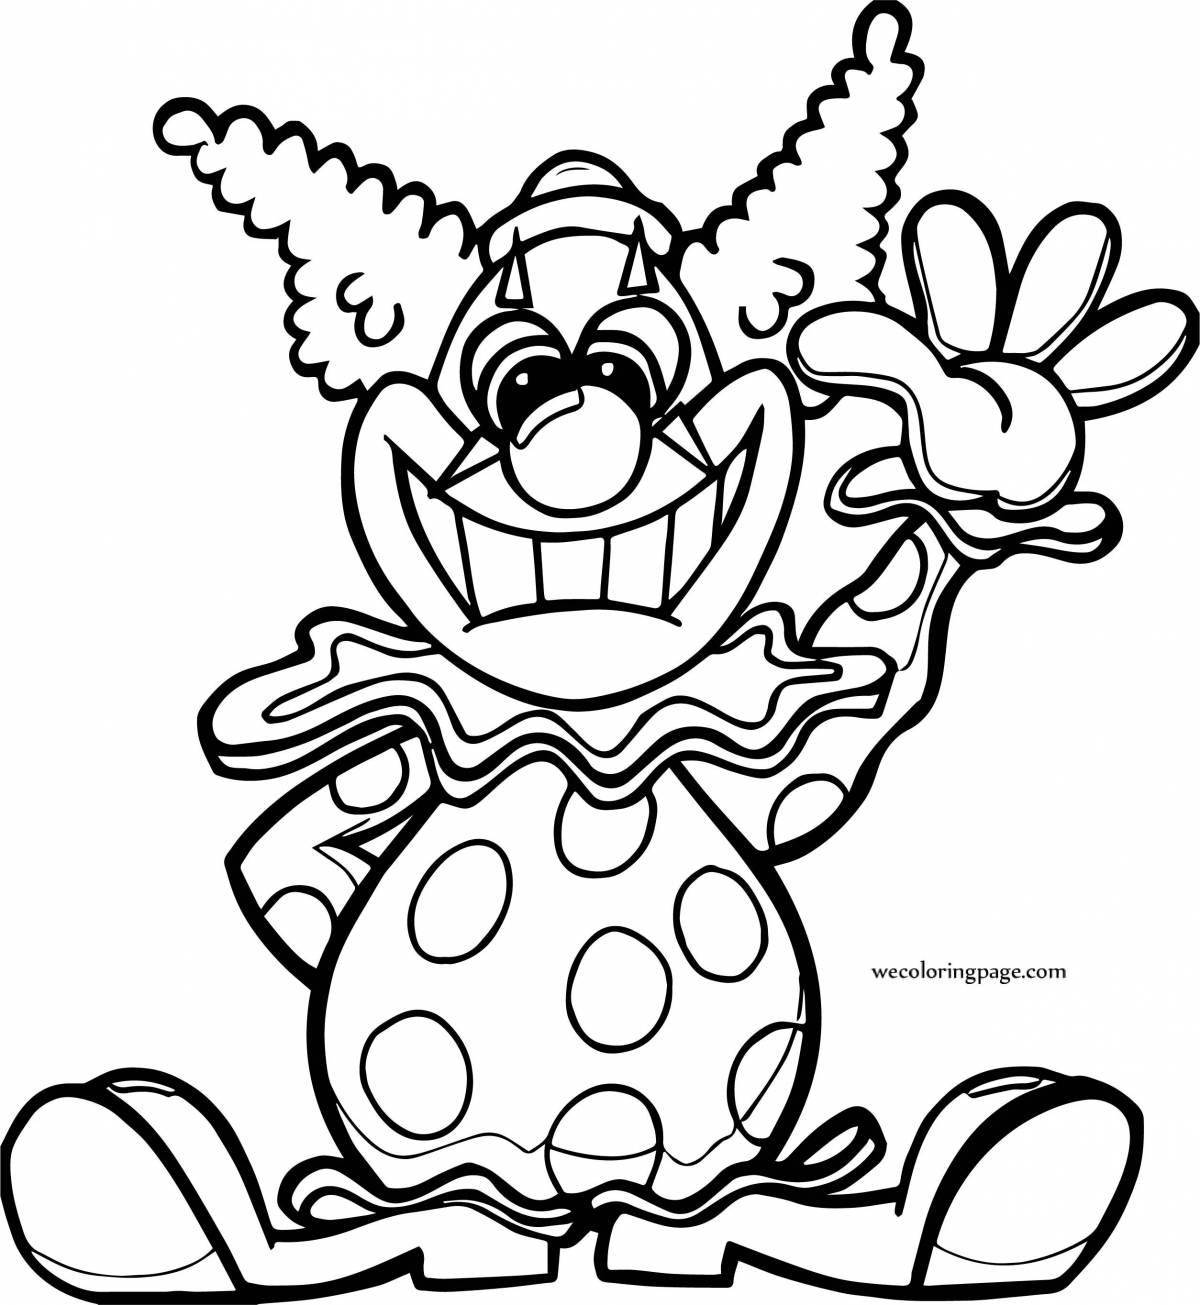 Jocular coloring page funny clown for kids